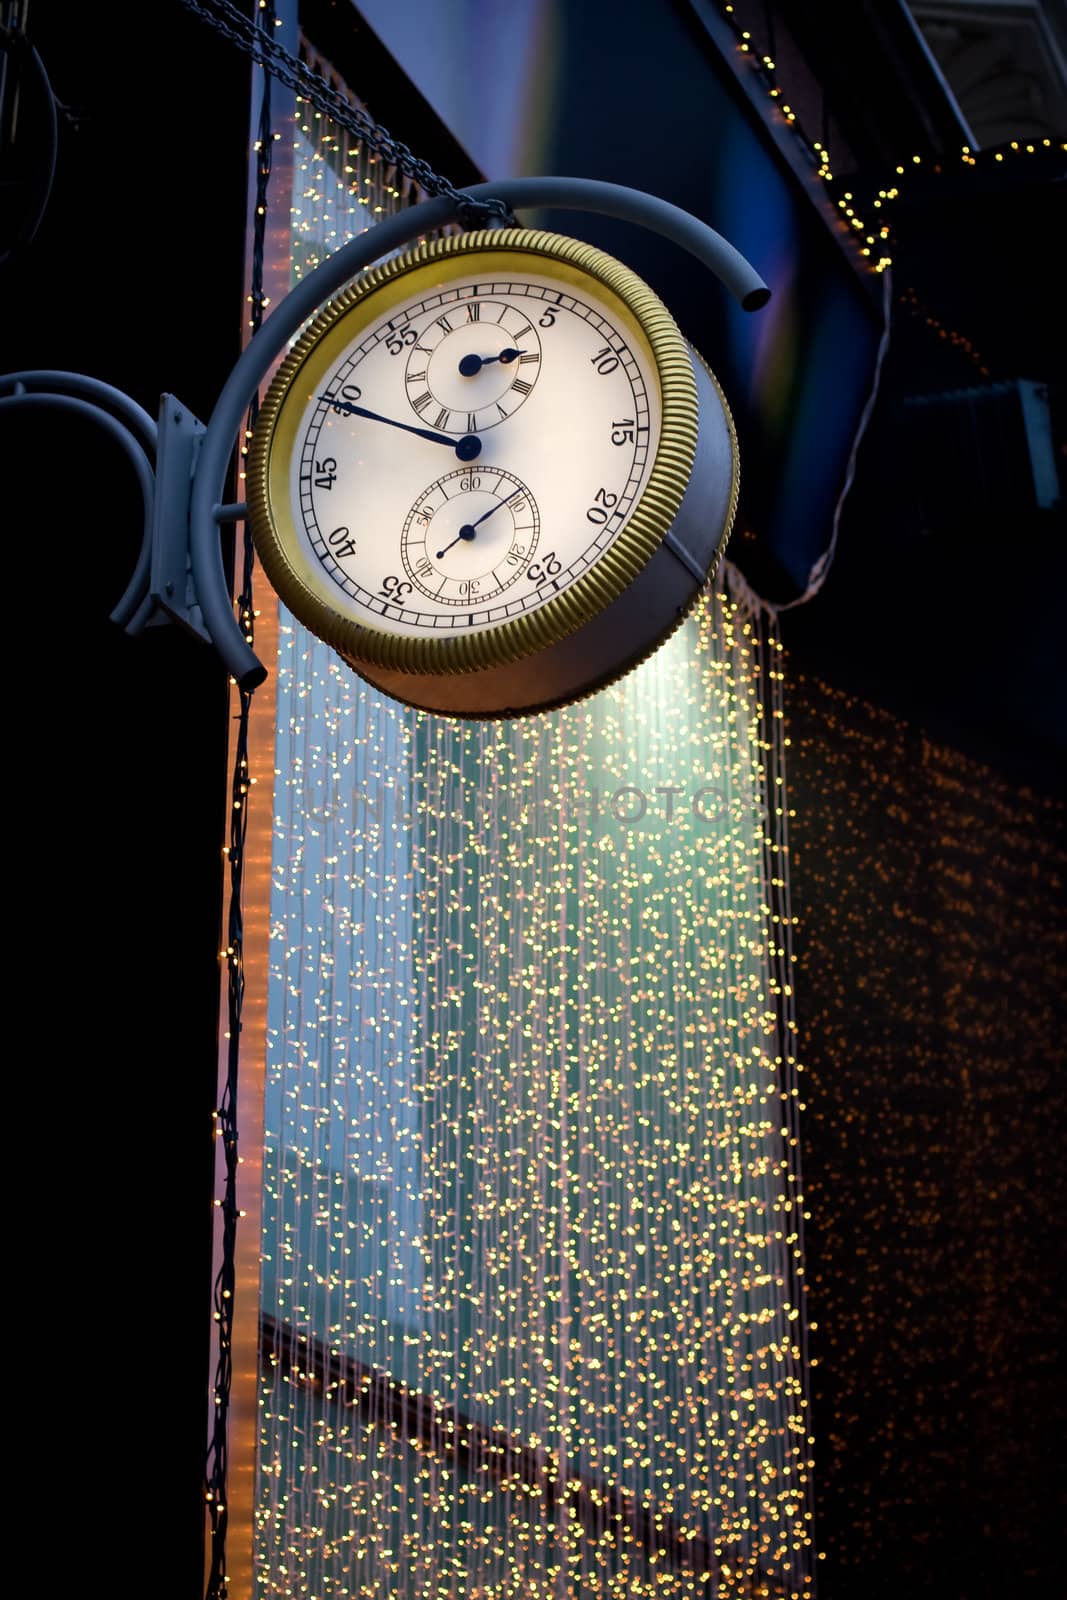 Street clock on a background of a garland